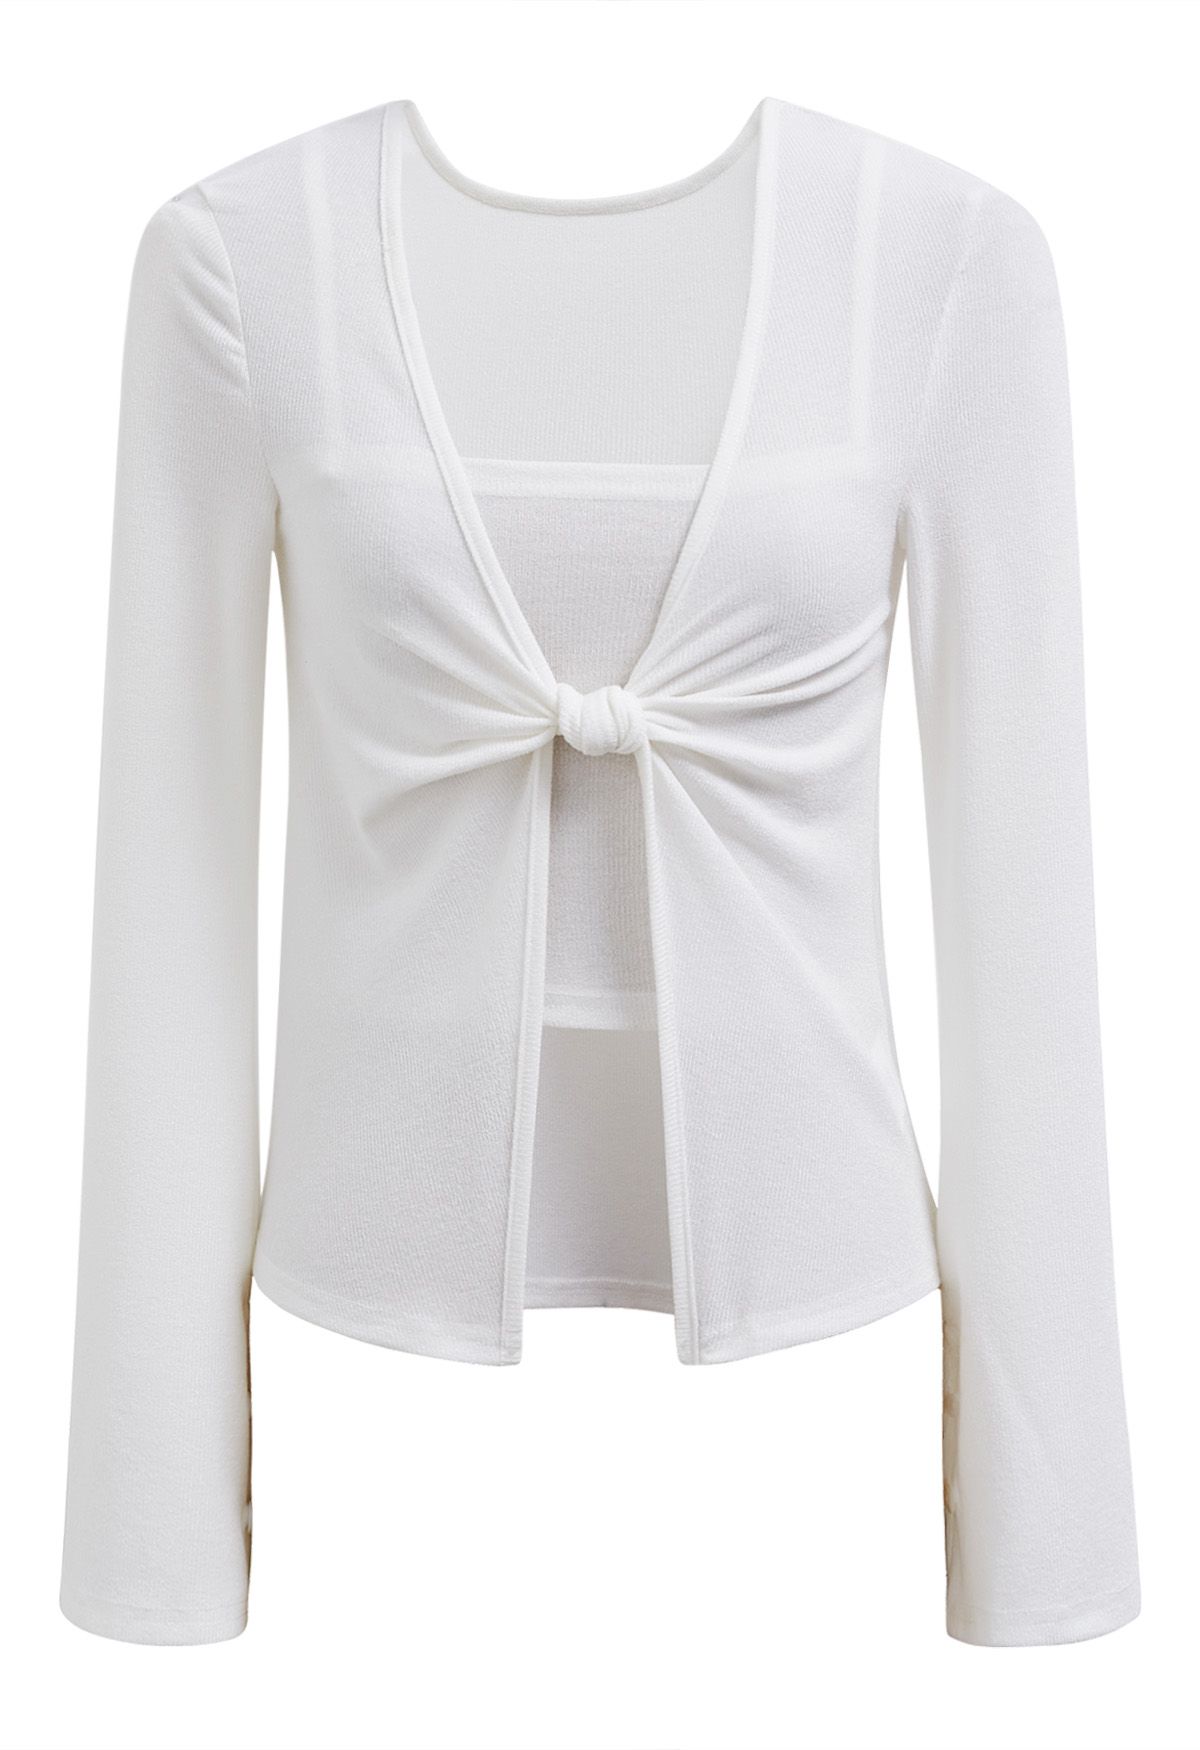 Knotted Front Two-Piece Top in White